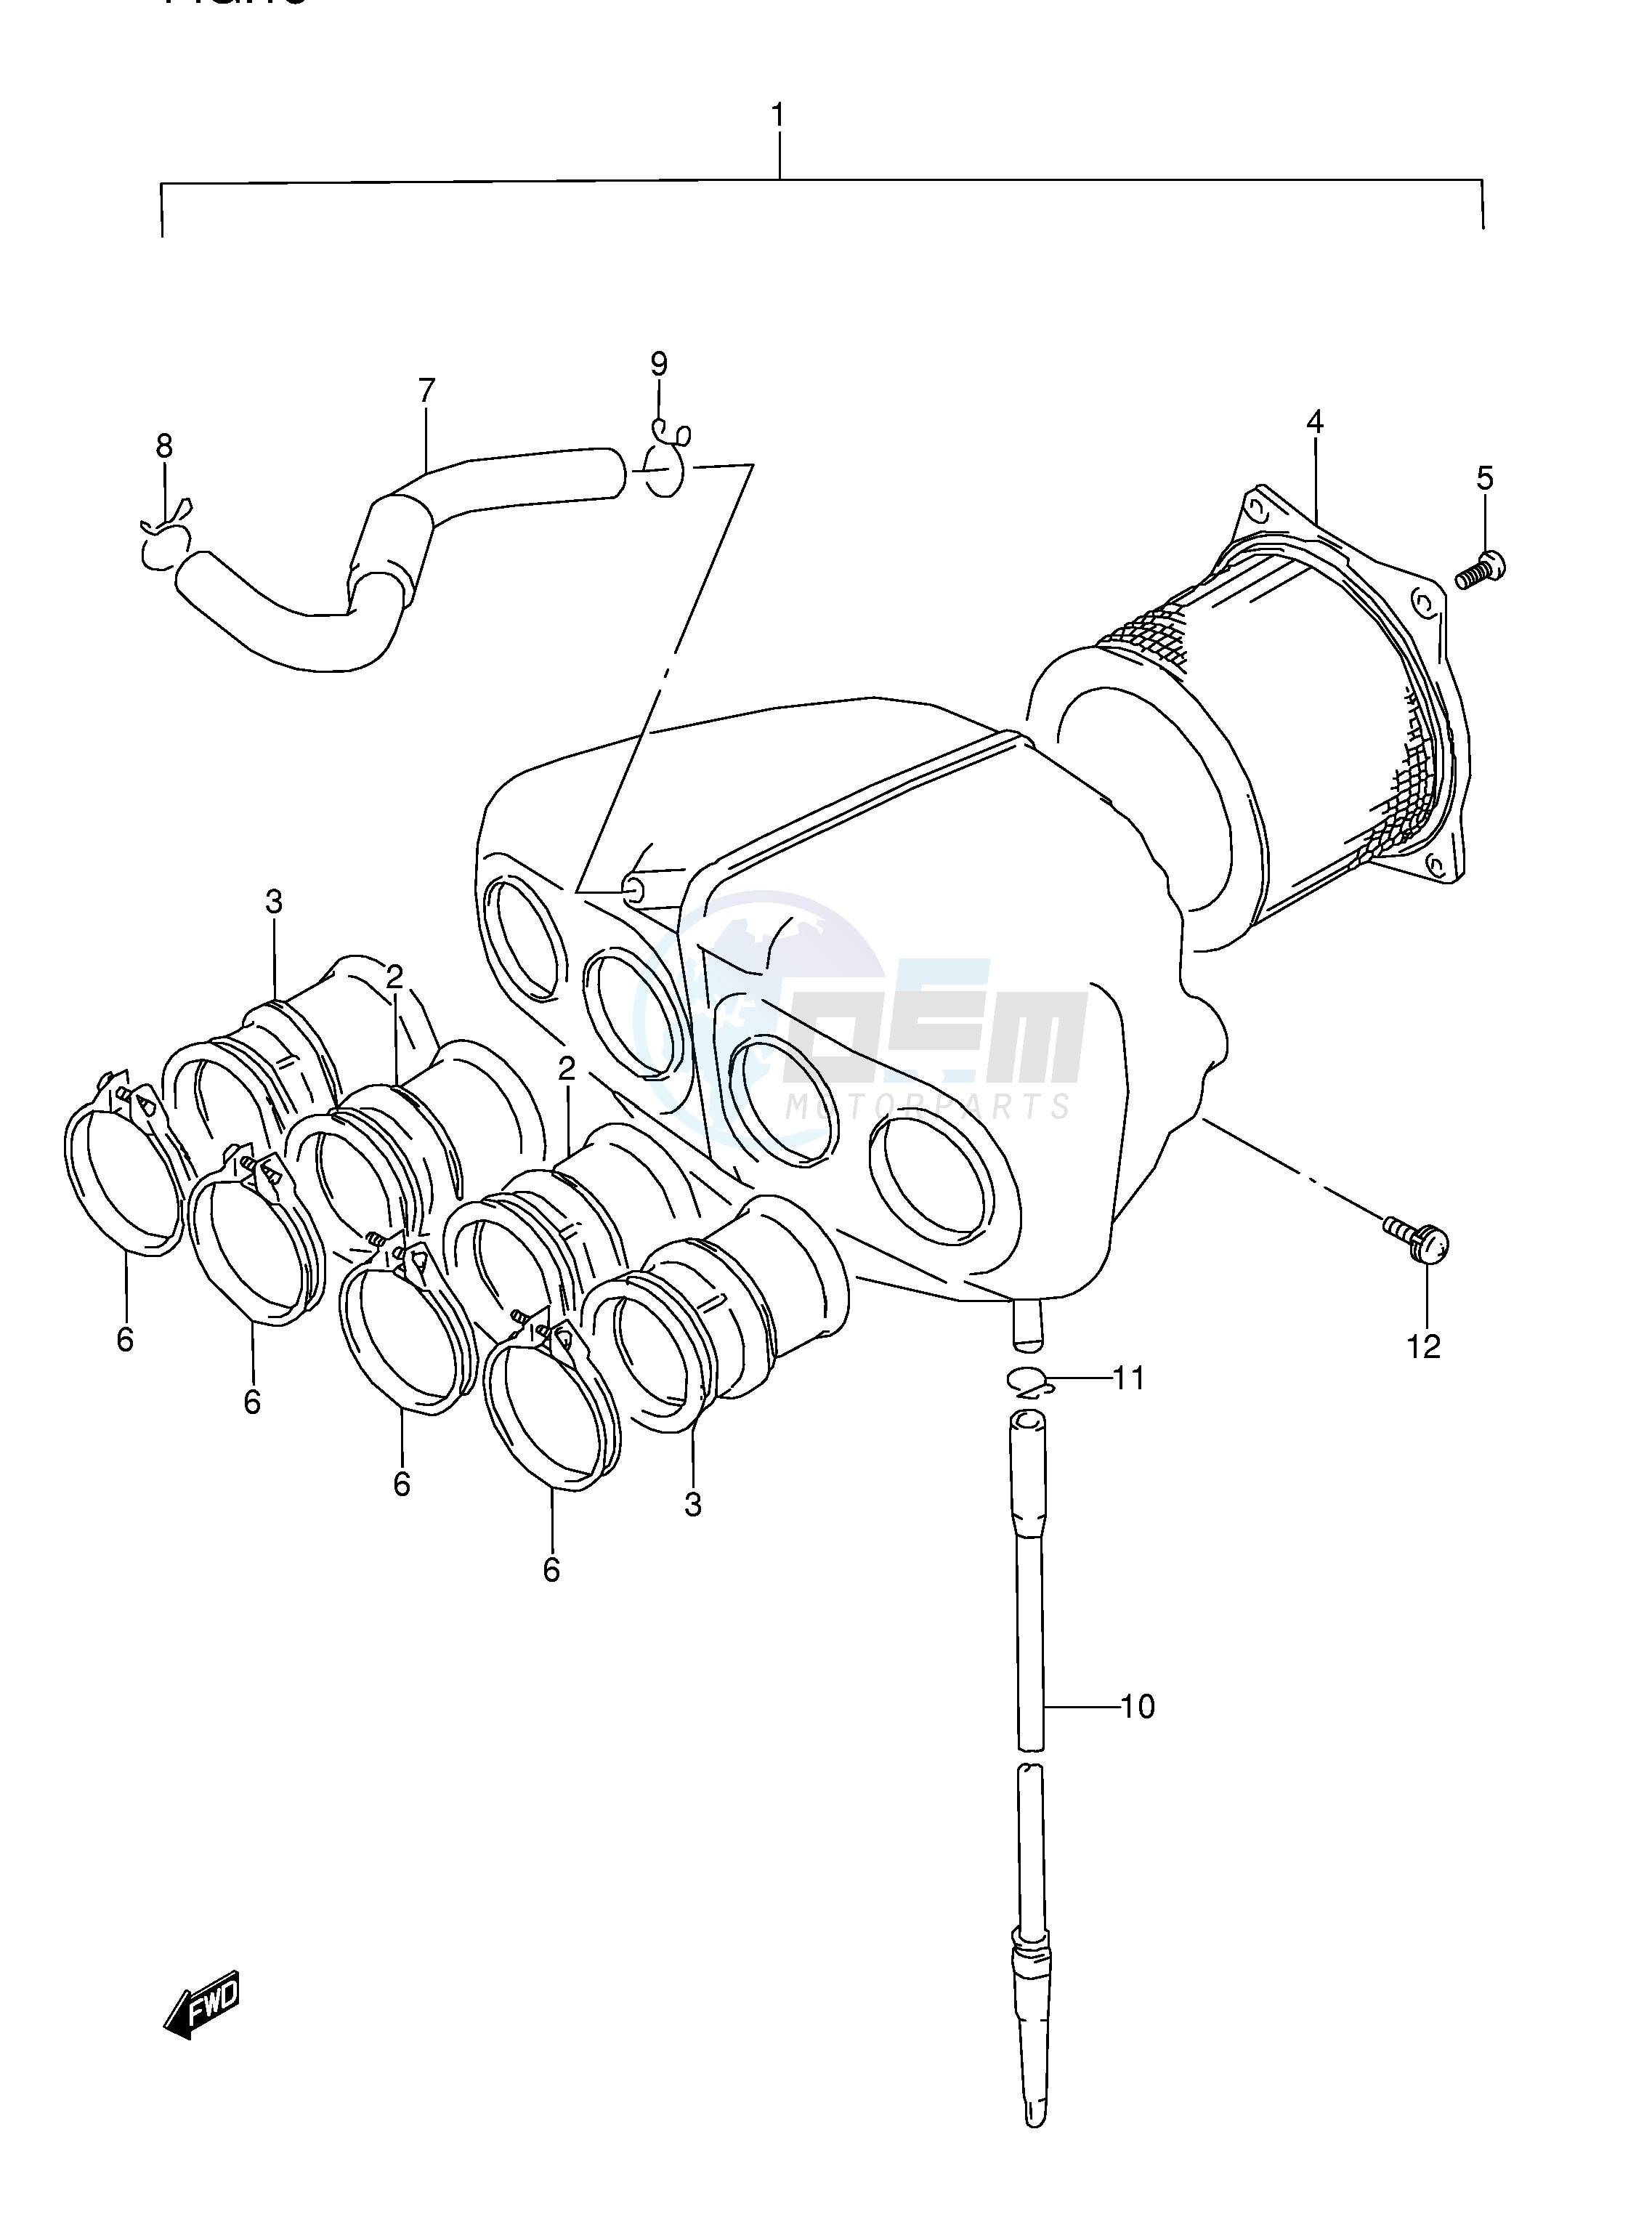 AIR CLEANER (SEE NOTE) blueprint